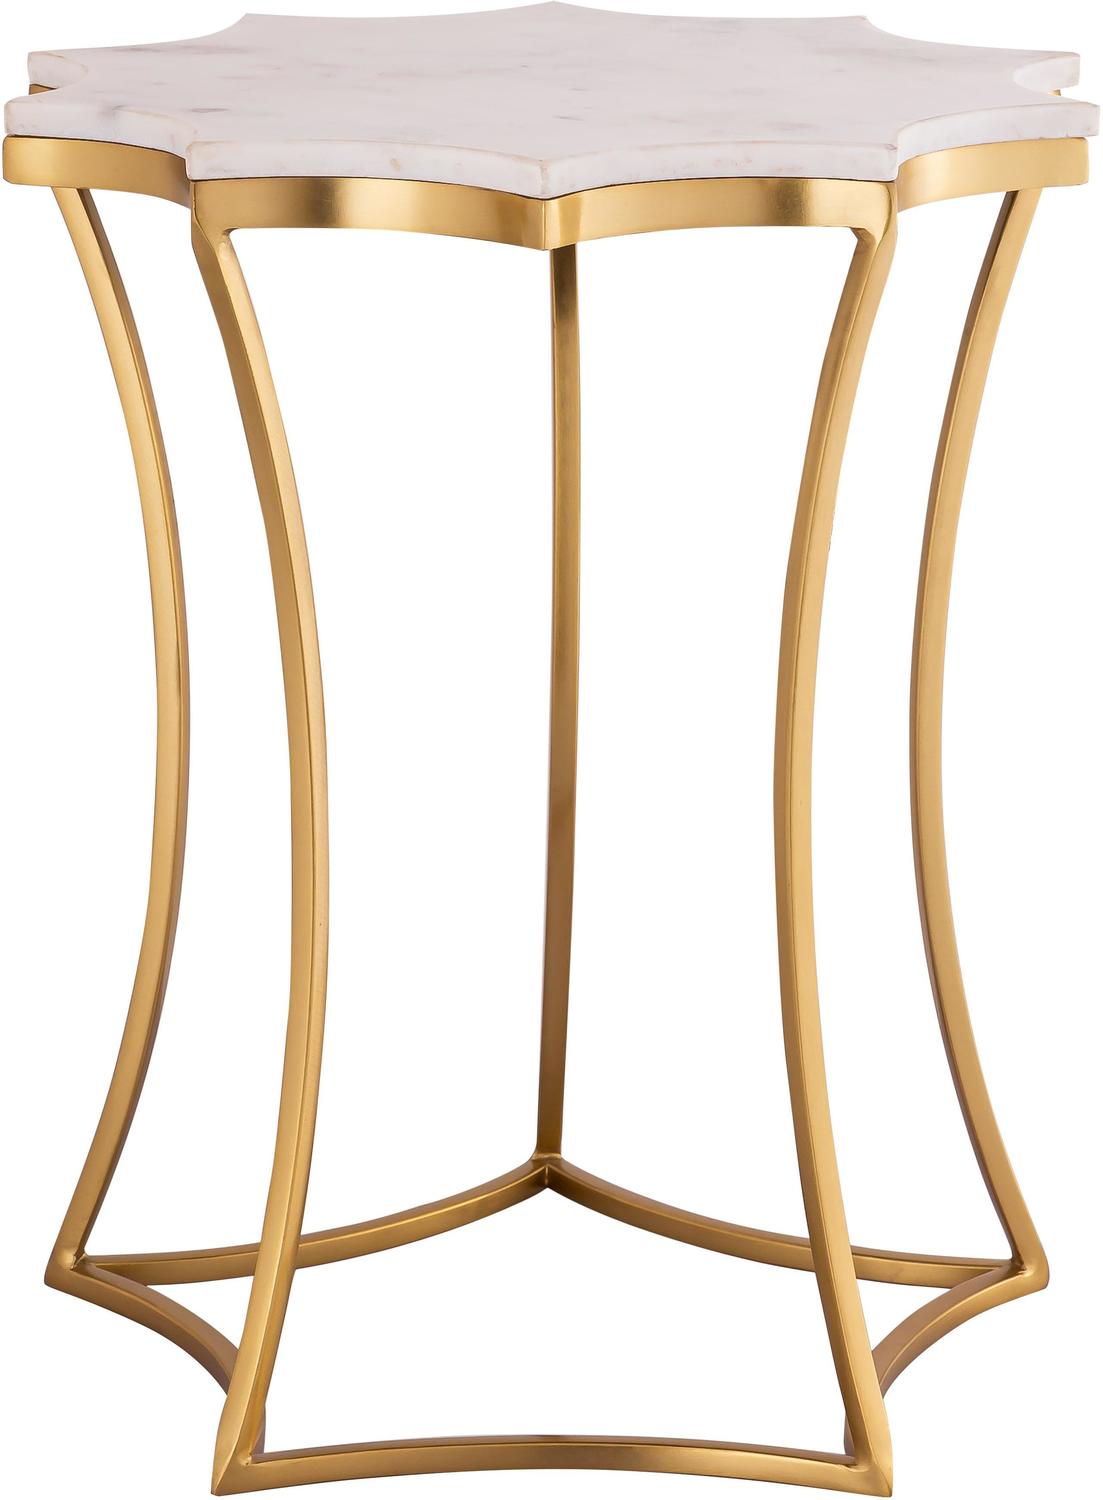 Tov Furniture Side Tables Accent Tables Gold